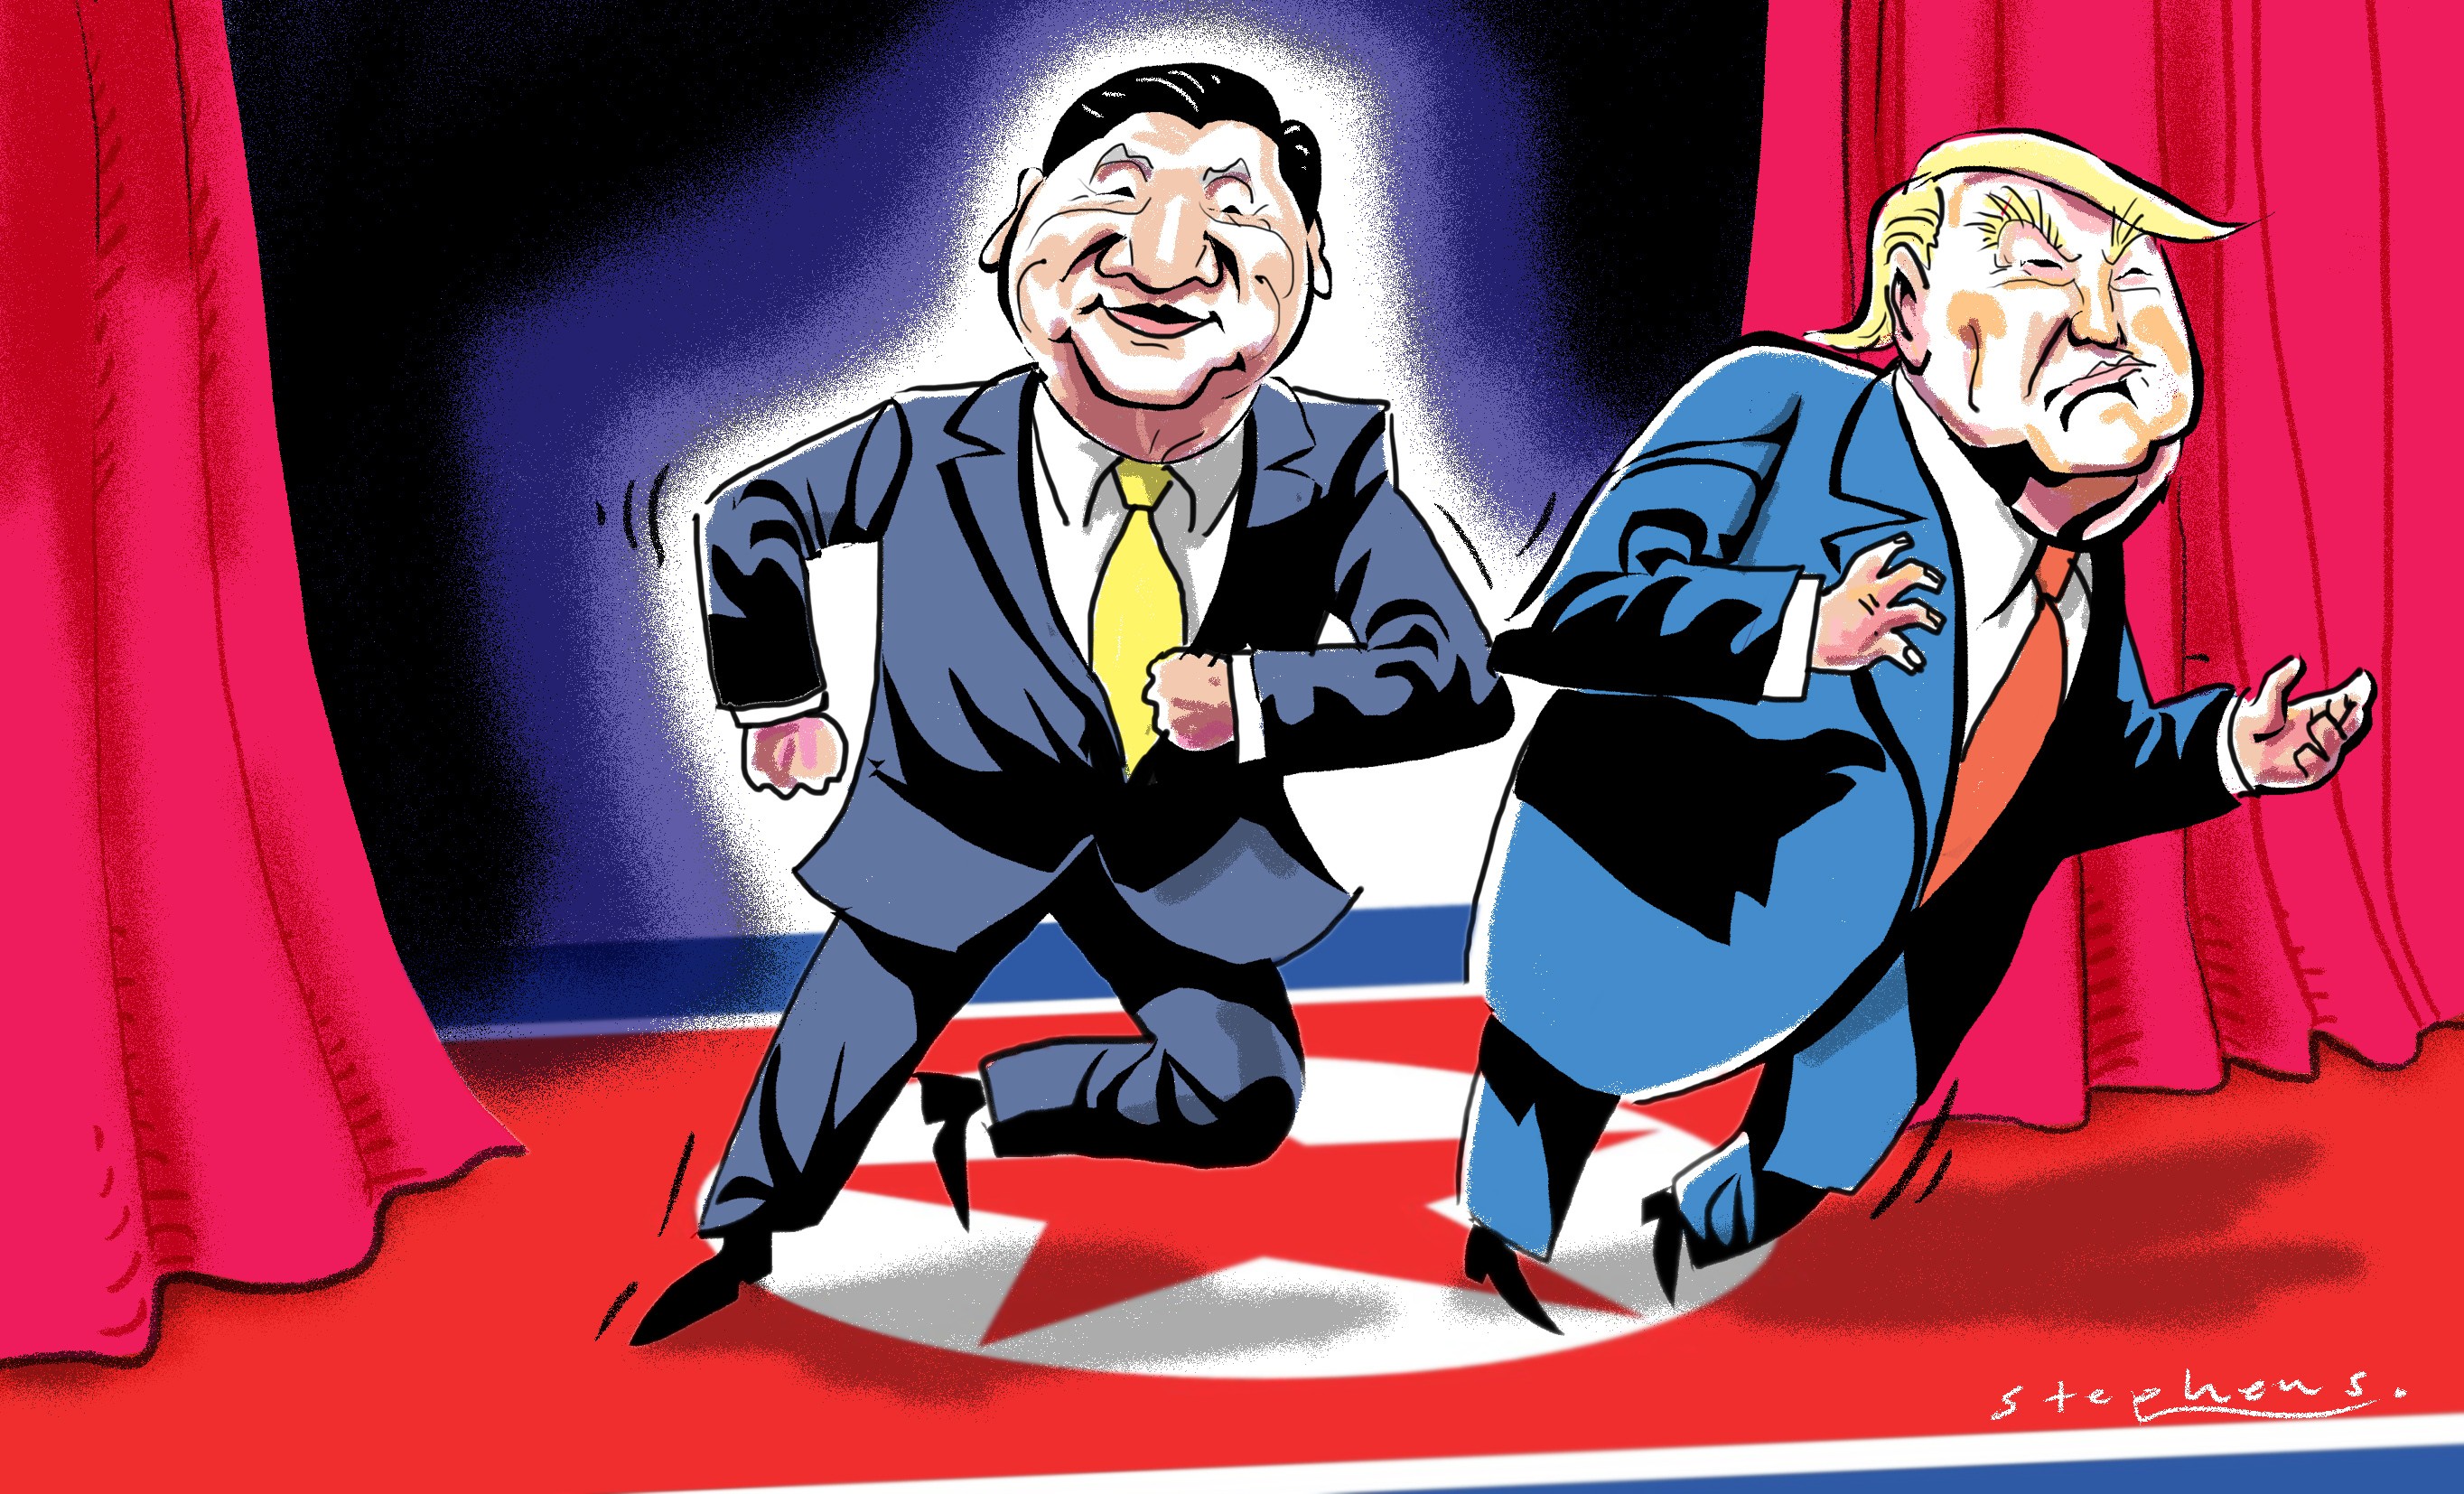 China may have been caught off guard by the Kim-Trump summit, but it has a huge stake in the region’s stability, and its role in matters related to the Korean peninsula remains unparalleled. Illustration: Craig Stephens